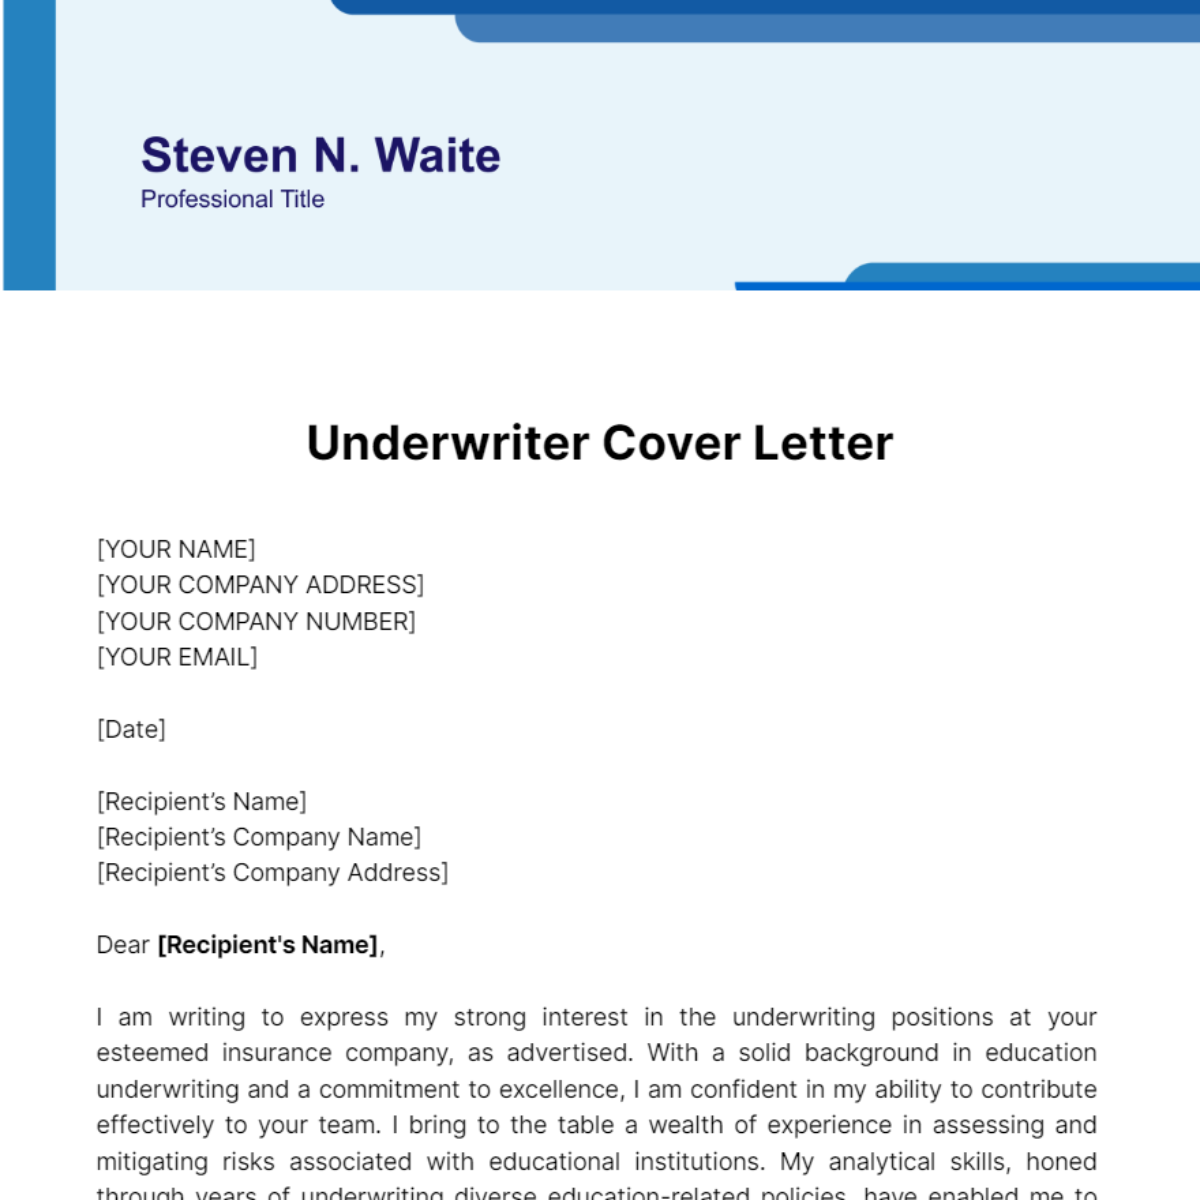 Underwriter Cover Letter Template